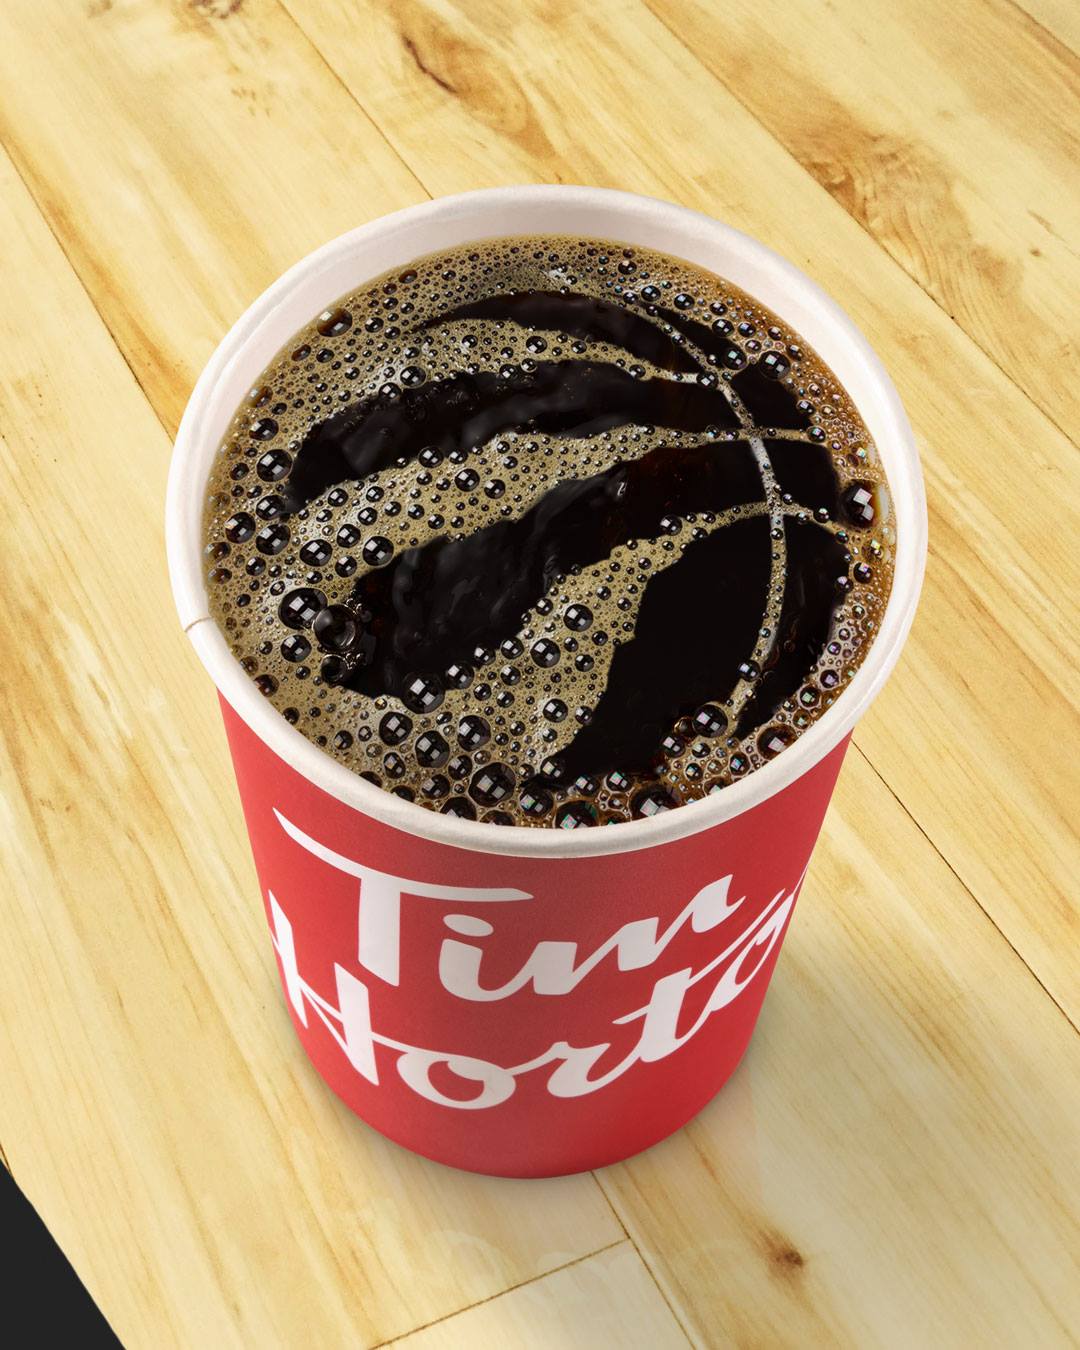 Top Tim Hortons Donuts and Coffee List Canada: Price, Calories